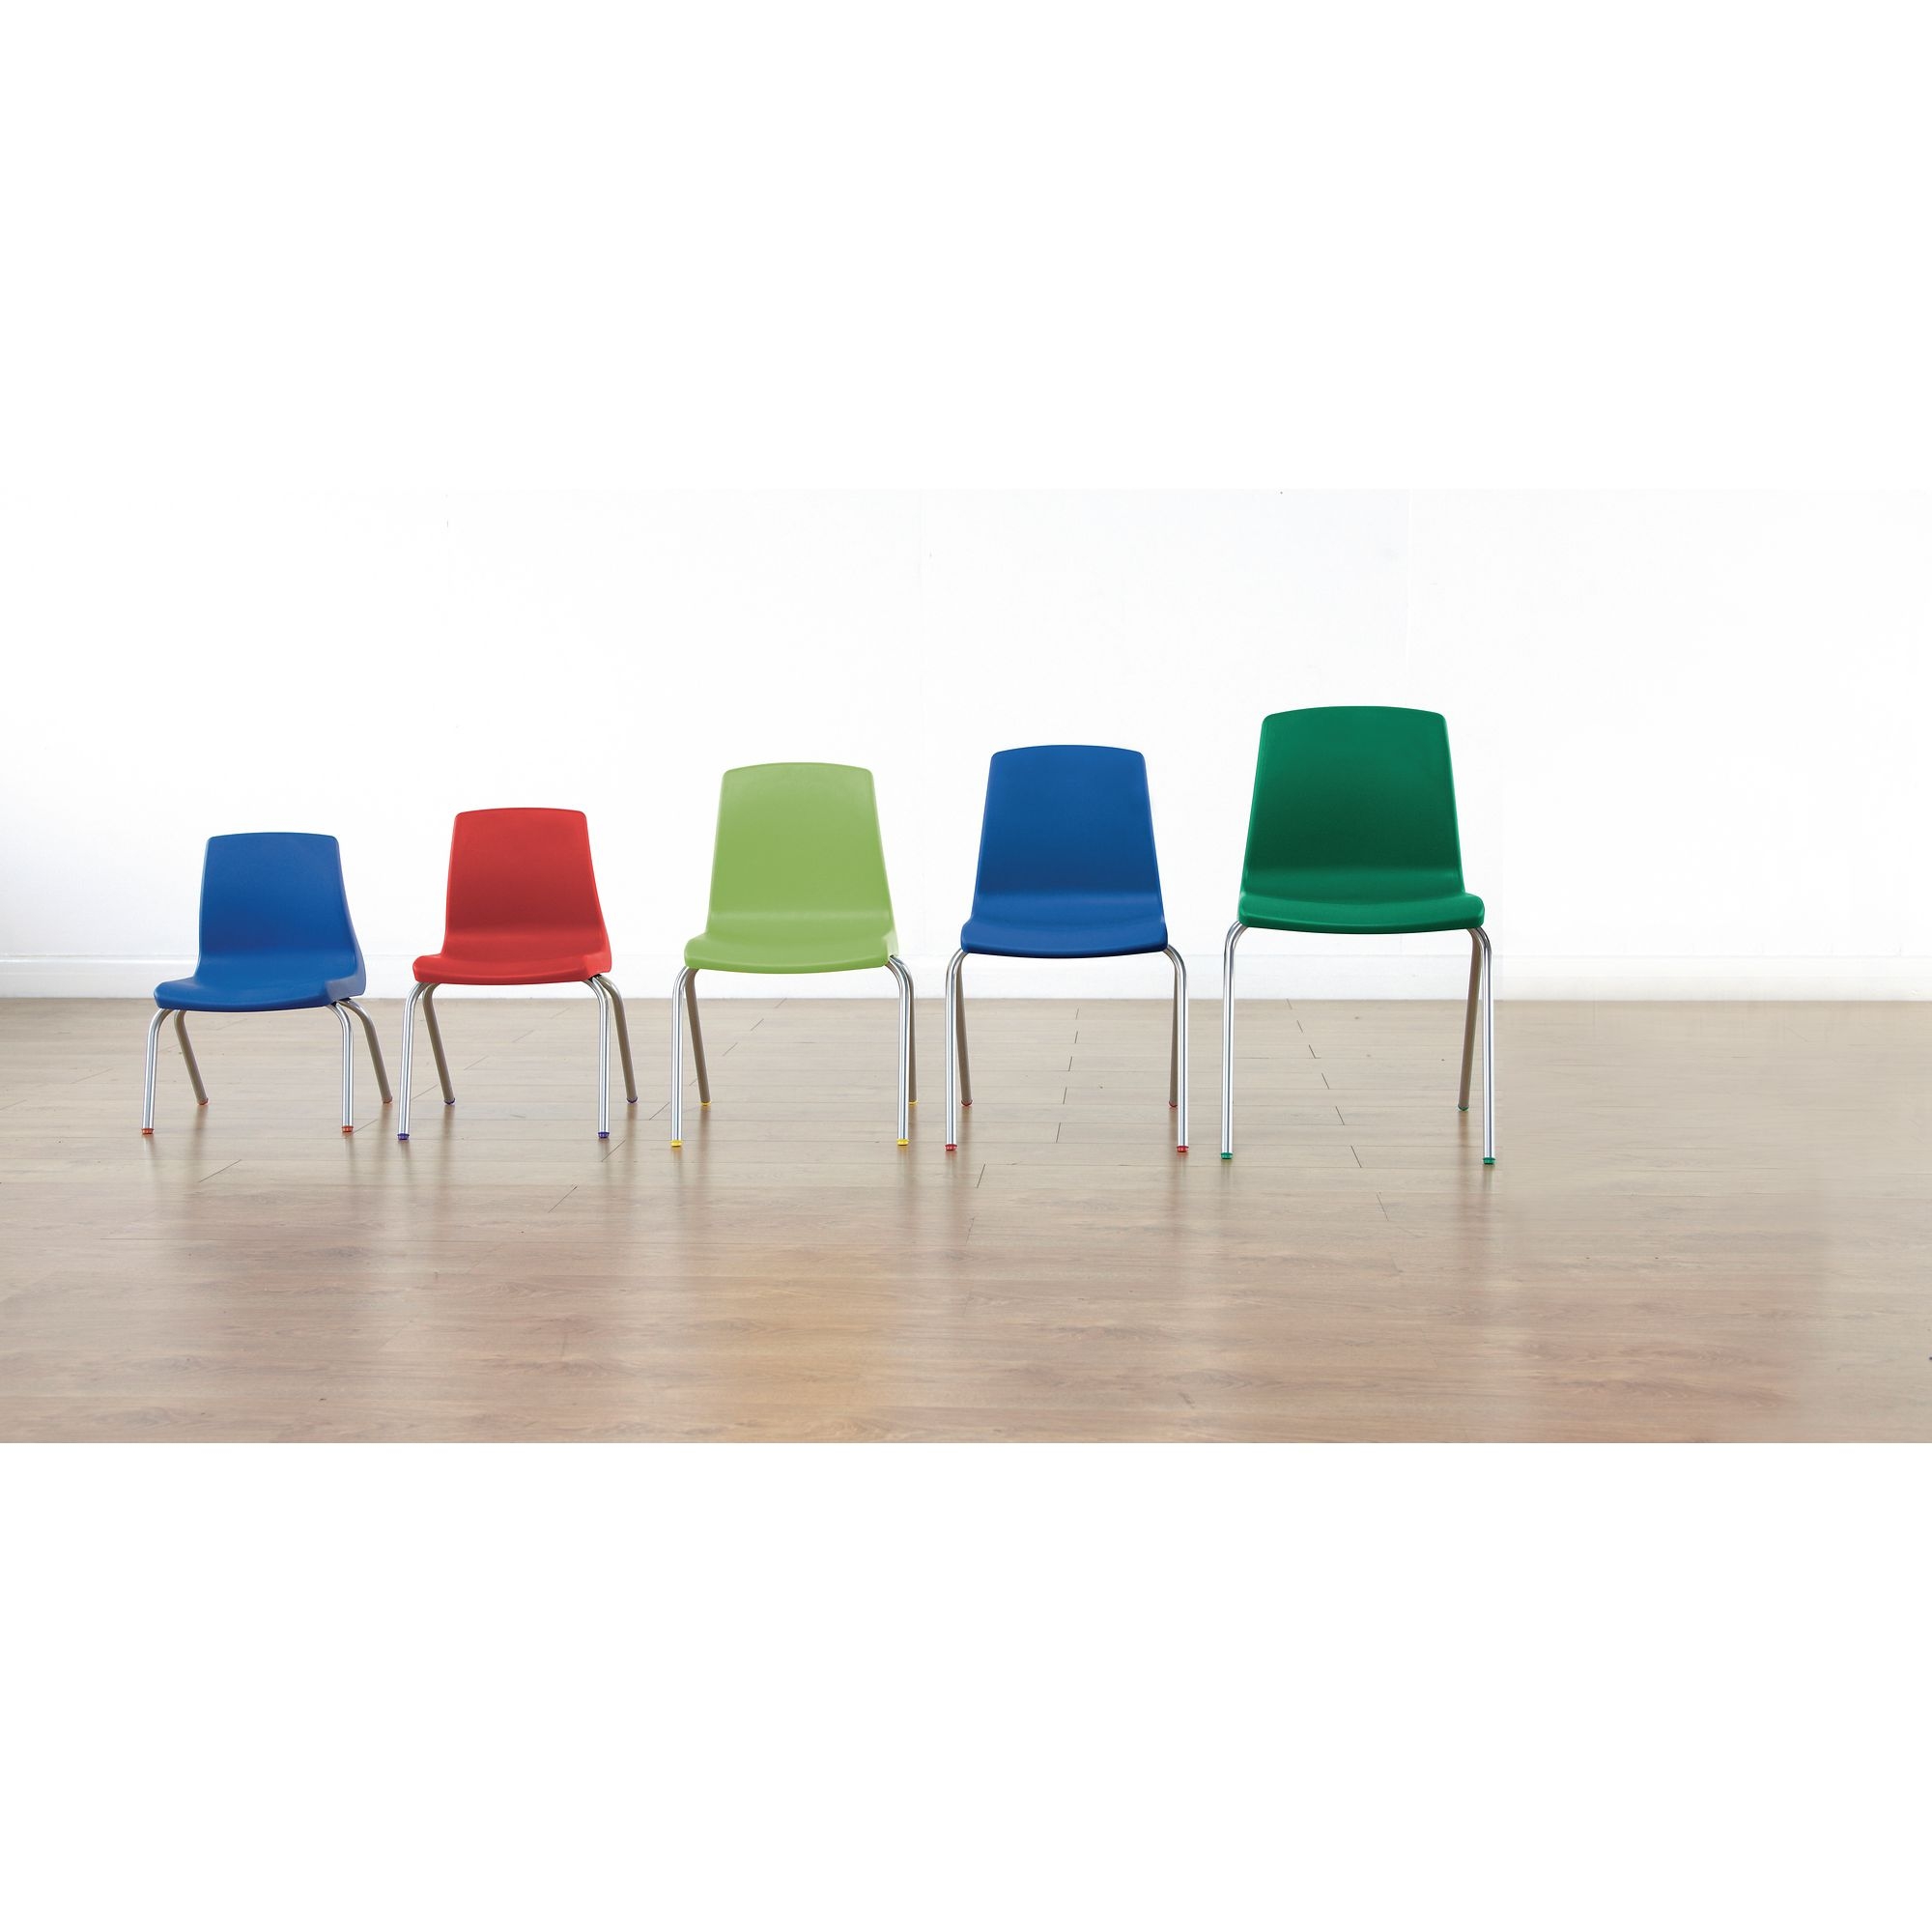 NP Chair - Size C - 350mm - Green